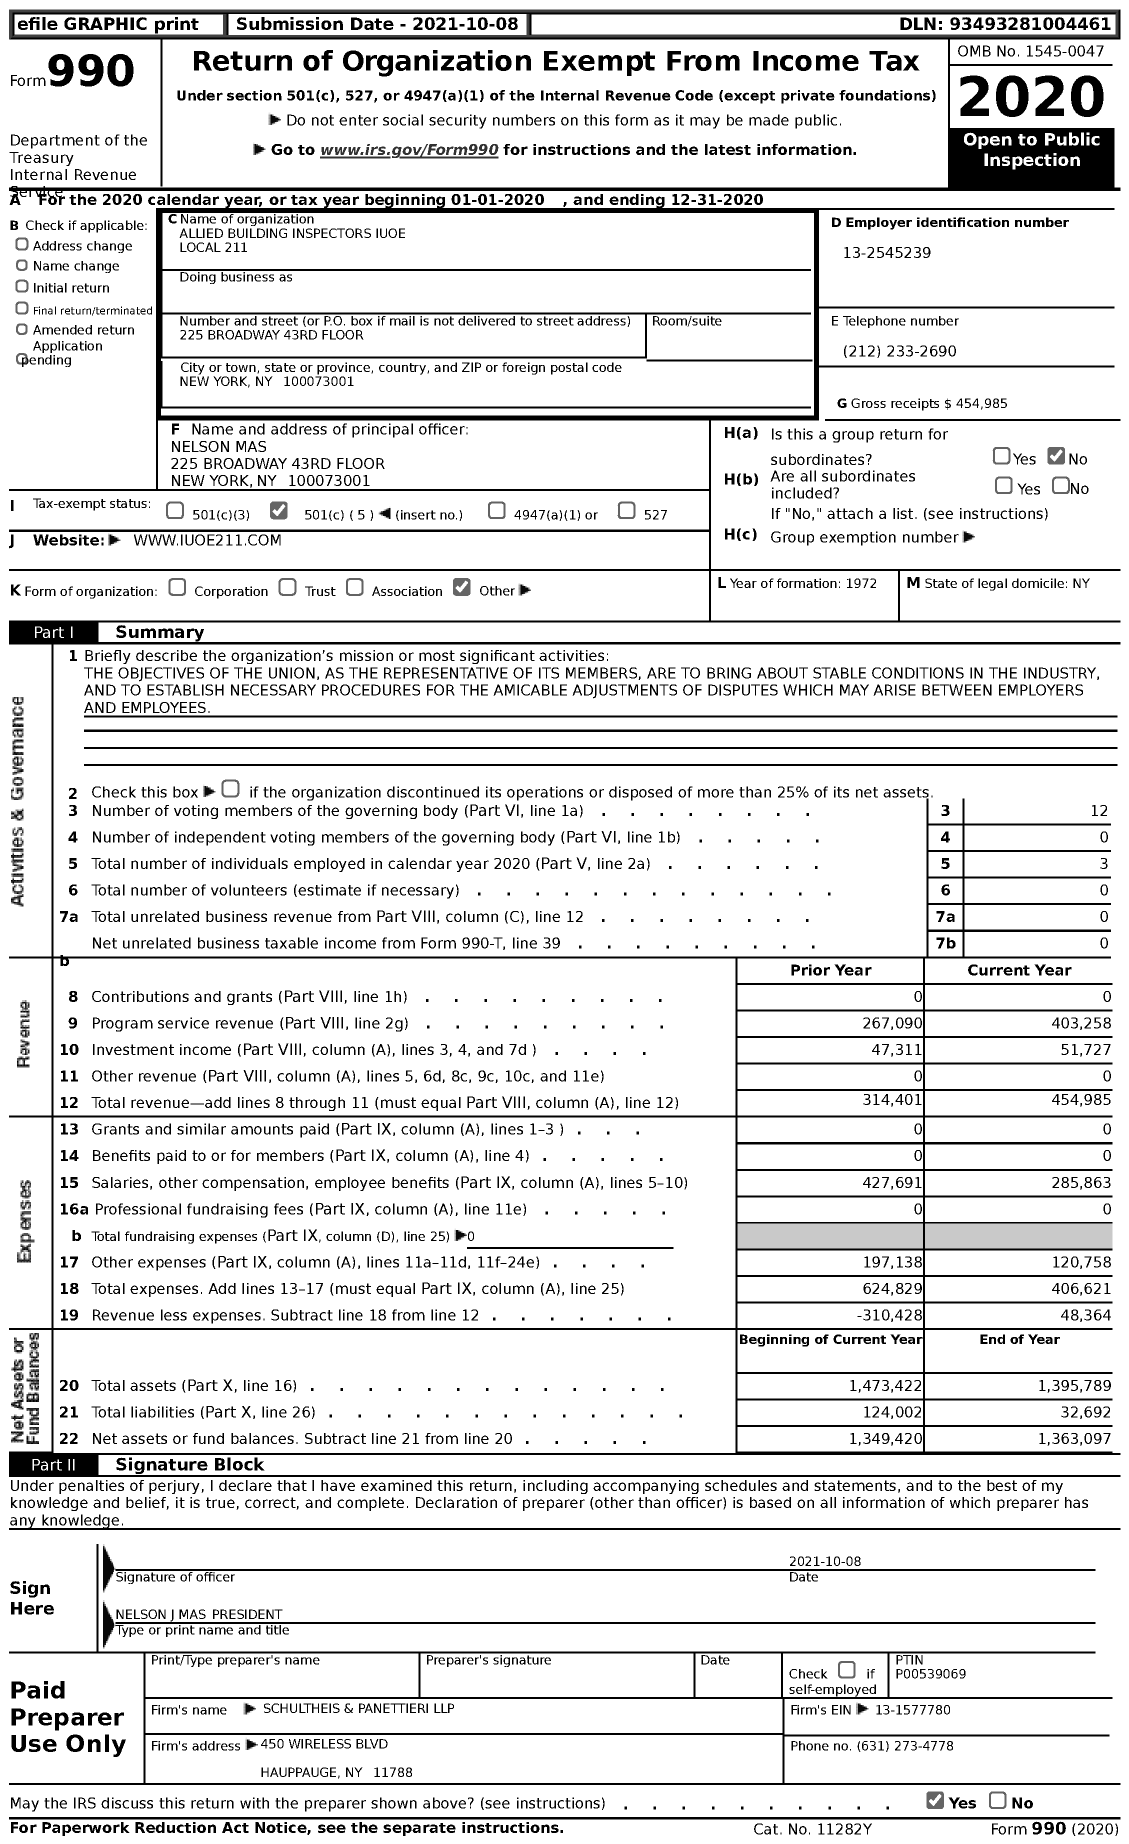 Image of first page of 2020 Form 990 for Allied Building Inspectors Iuoe Local 211